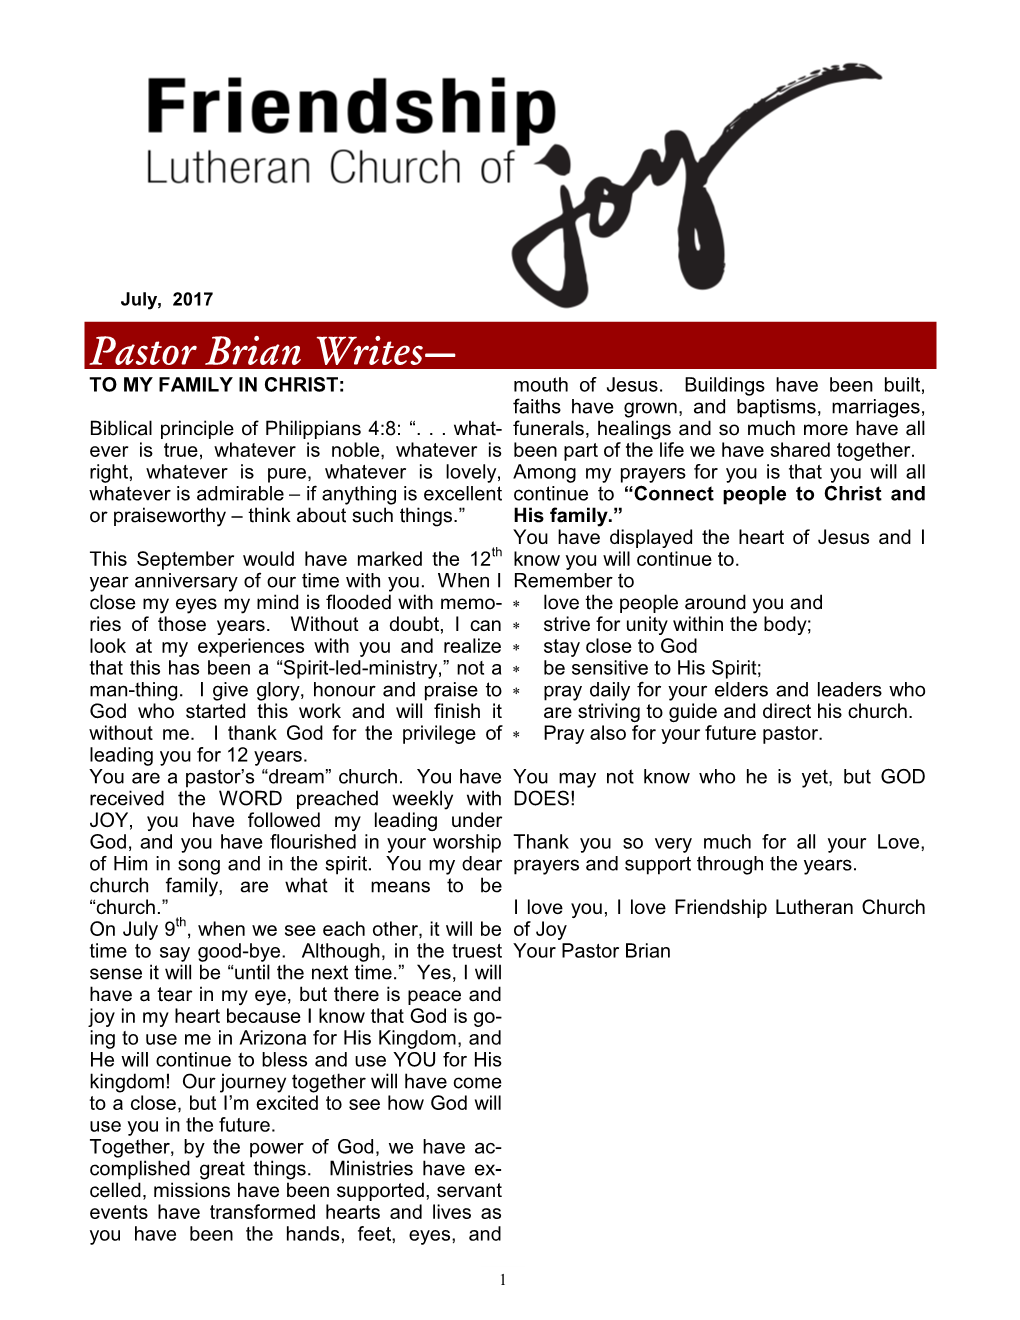 Pastor Brian Writes— to MY FAMILY in CHRIST: Mouth of Jesus